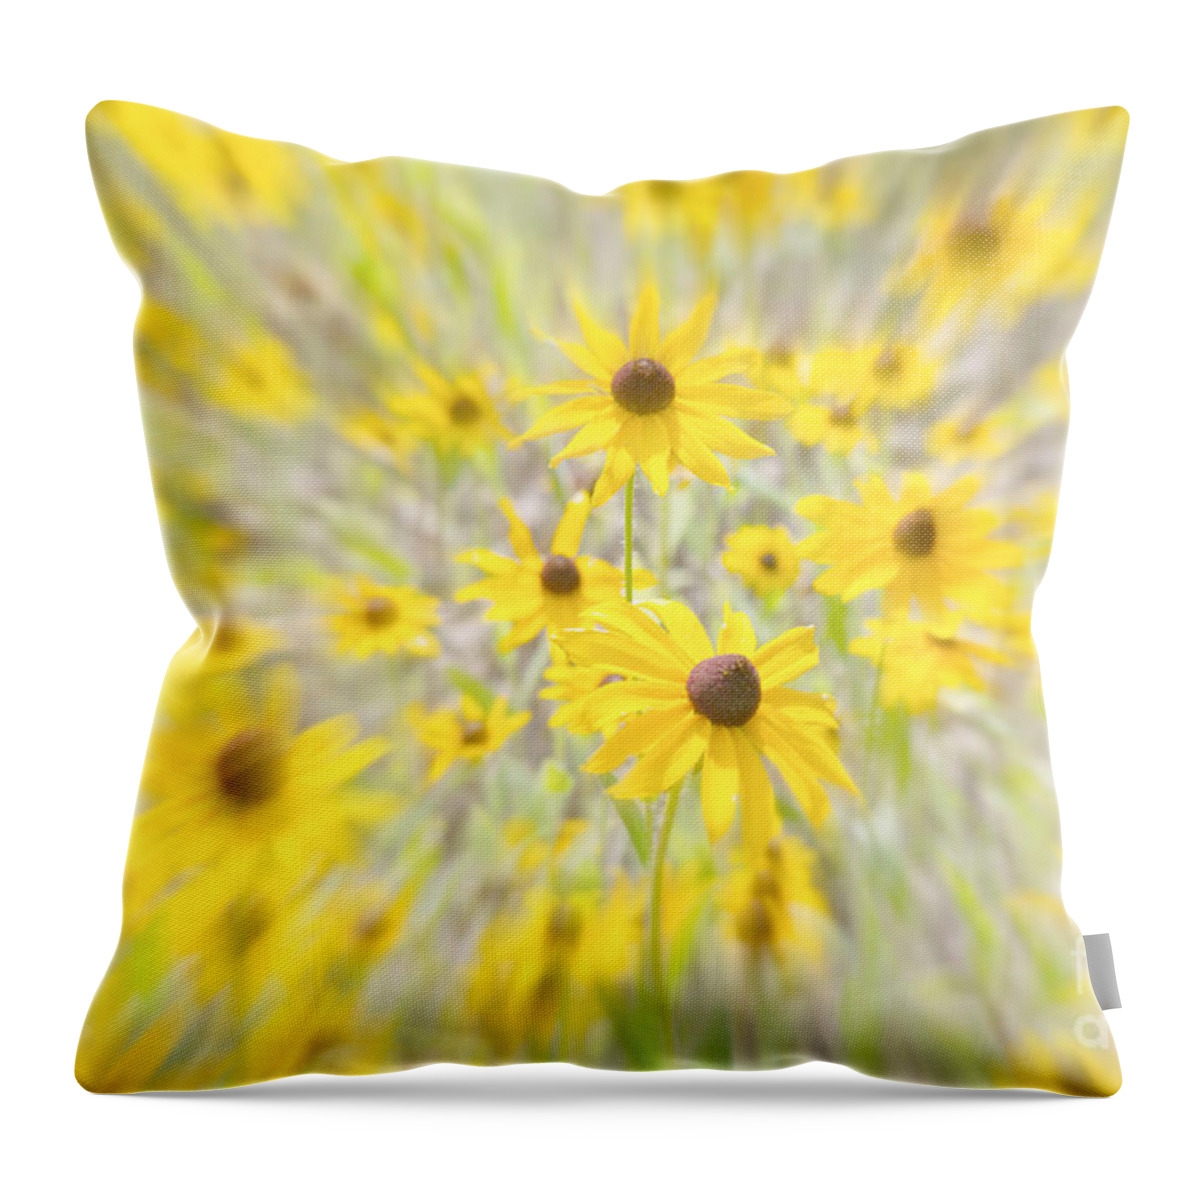 Flower Throw Pillow featuring the photograph Crossing Over by Chris Scroggins